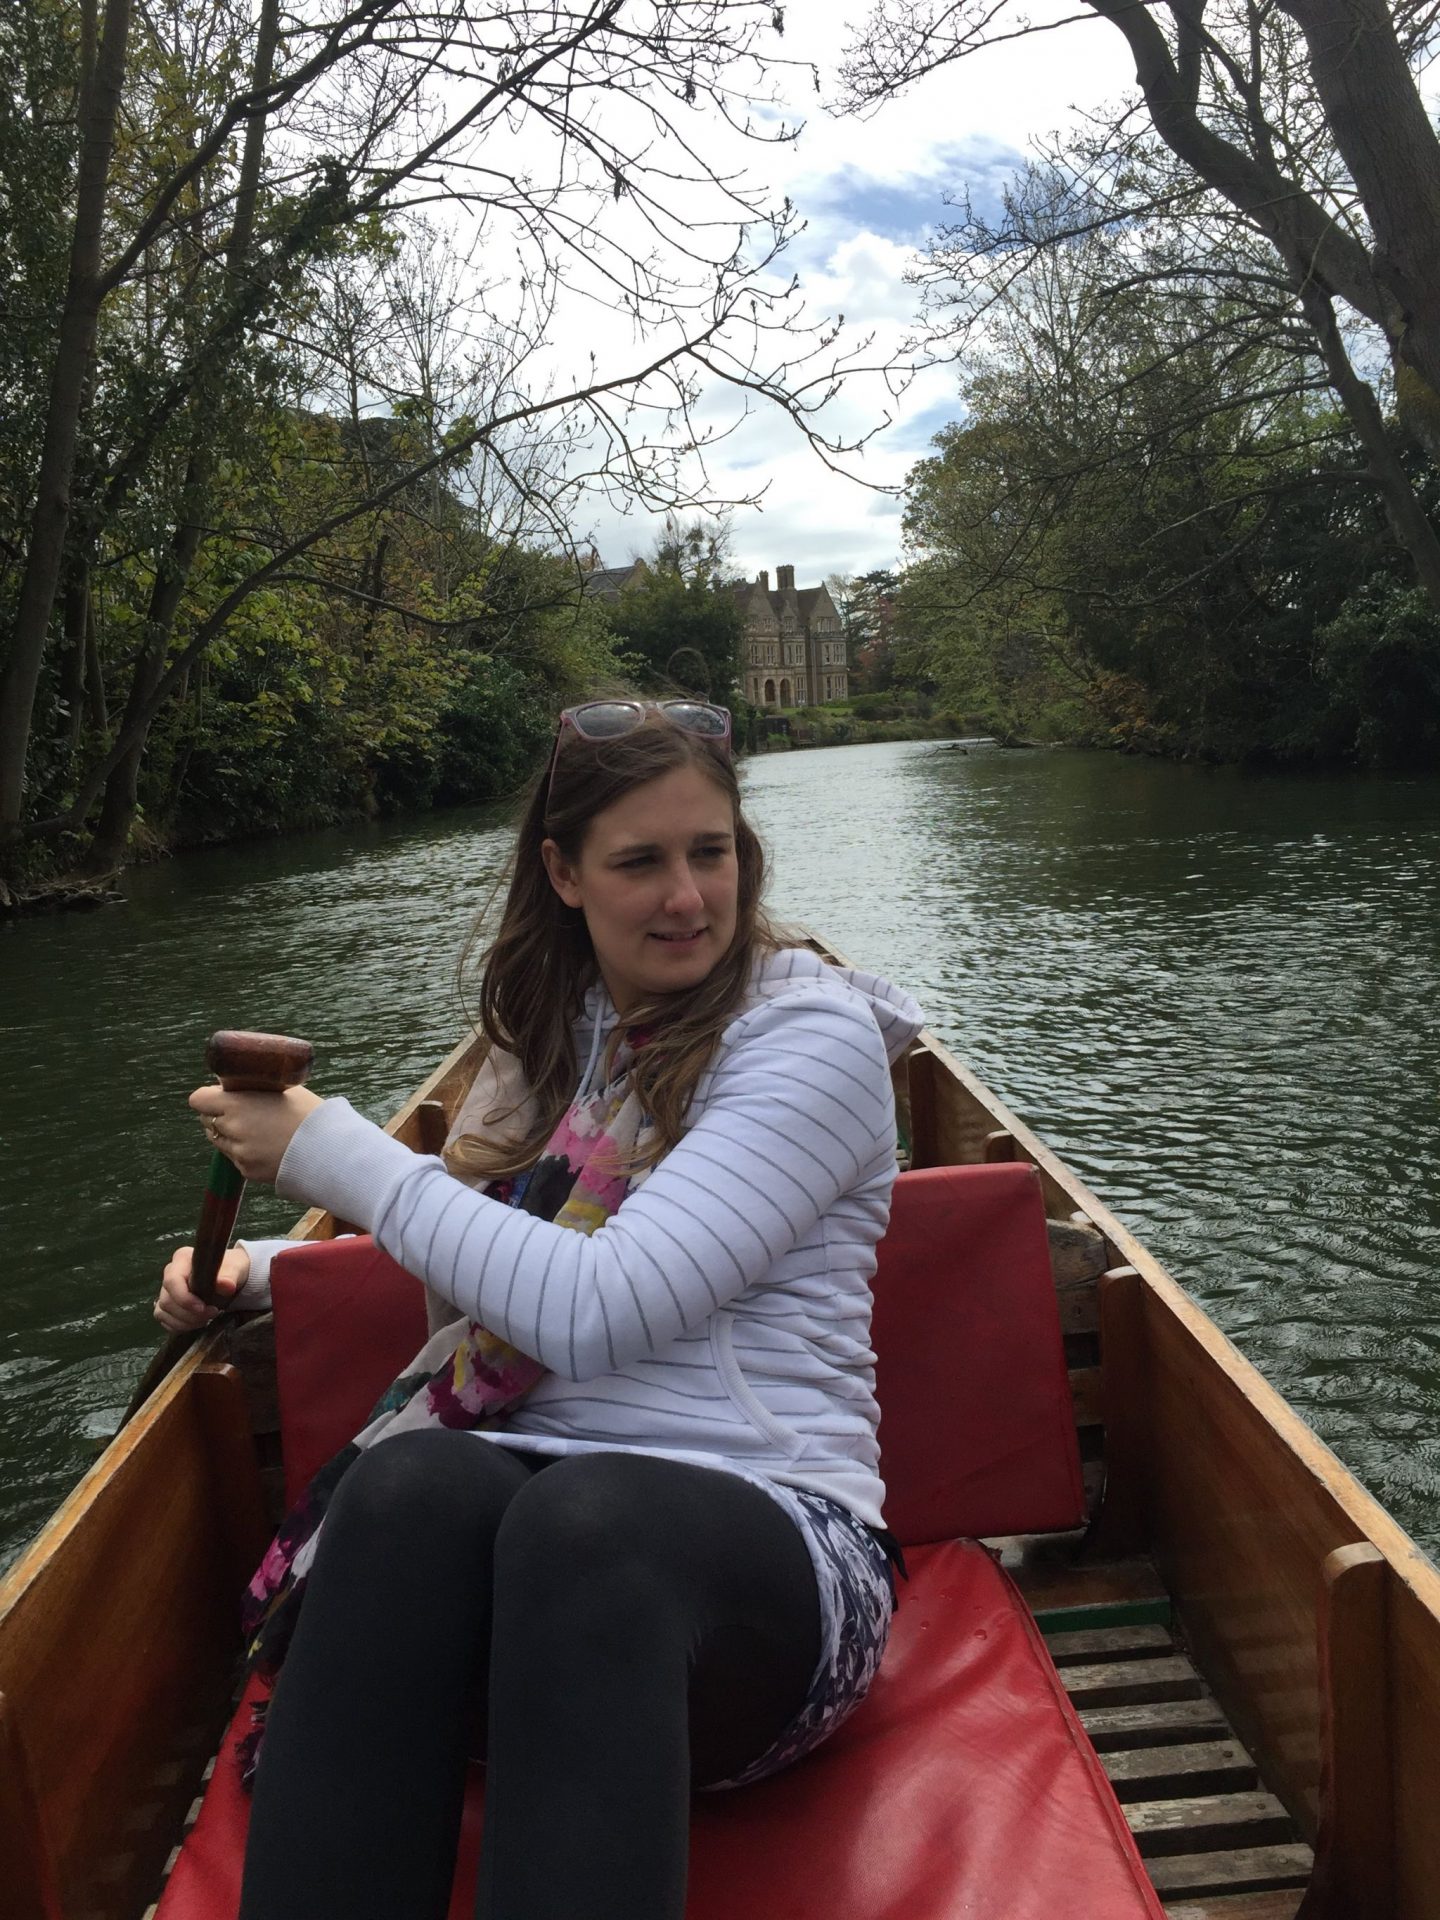 Punting on the River Cherwell